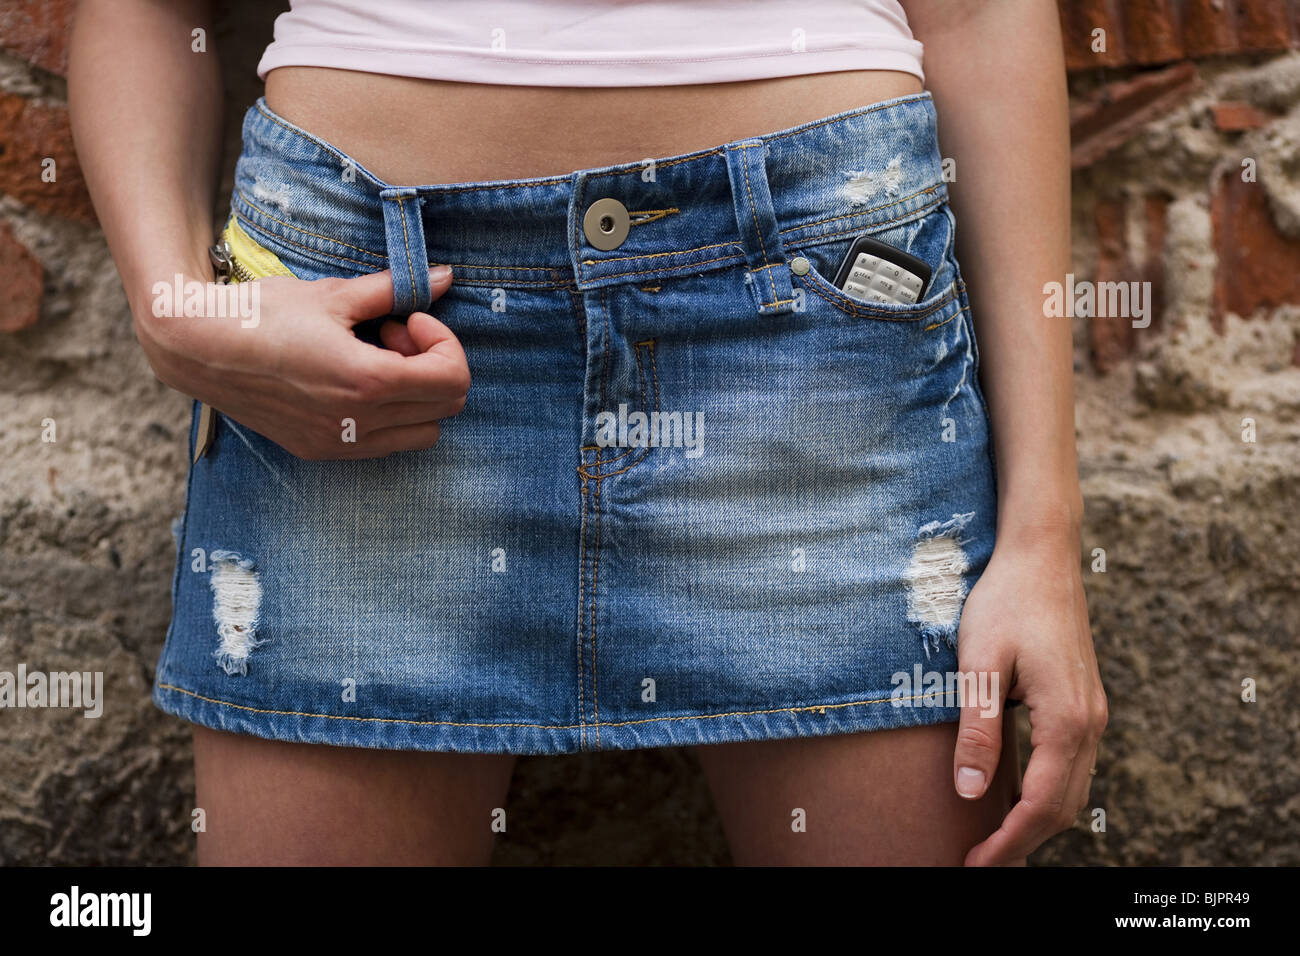 Midsection of a woman in short skirt Stock Photo